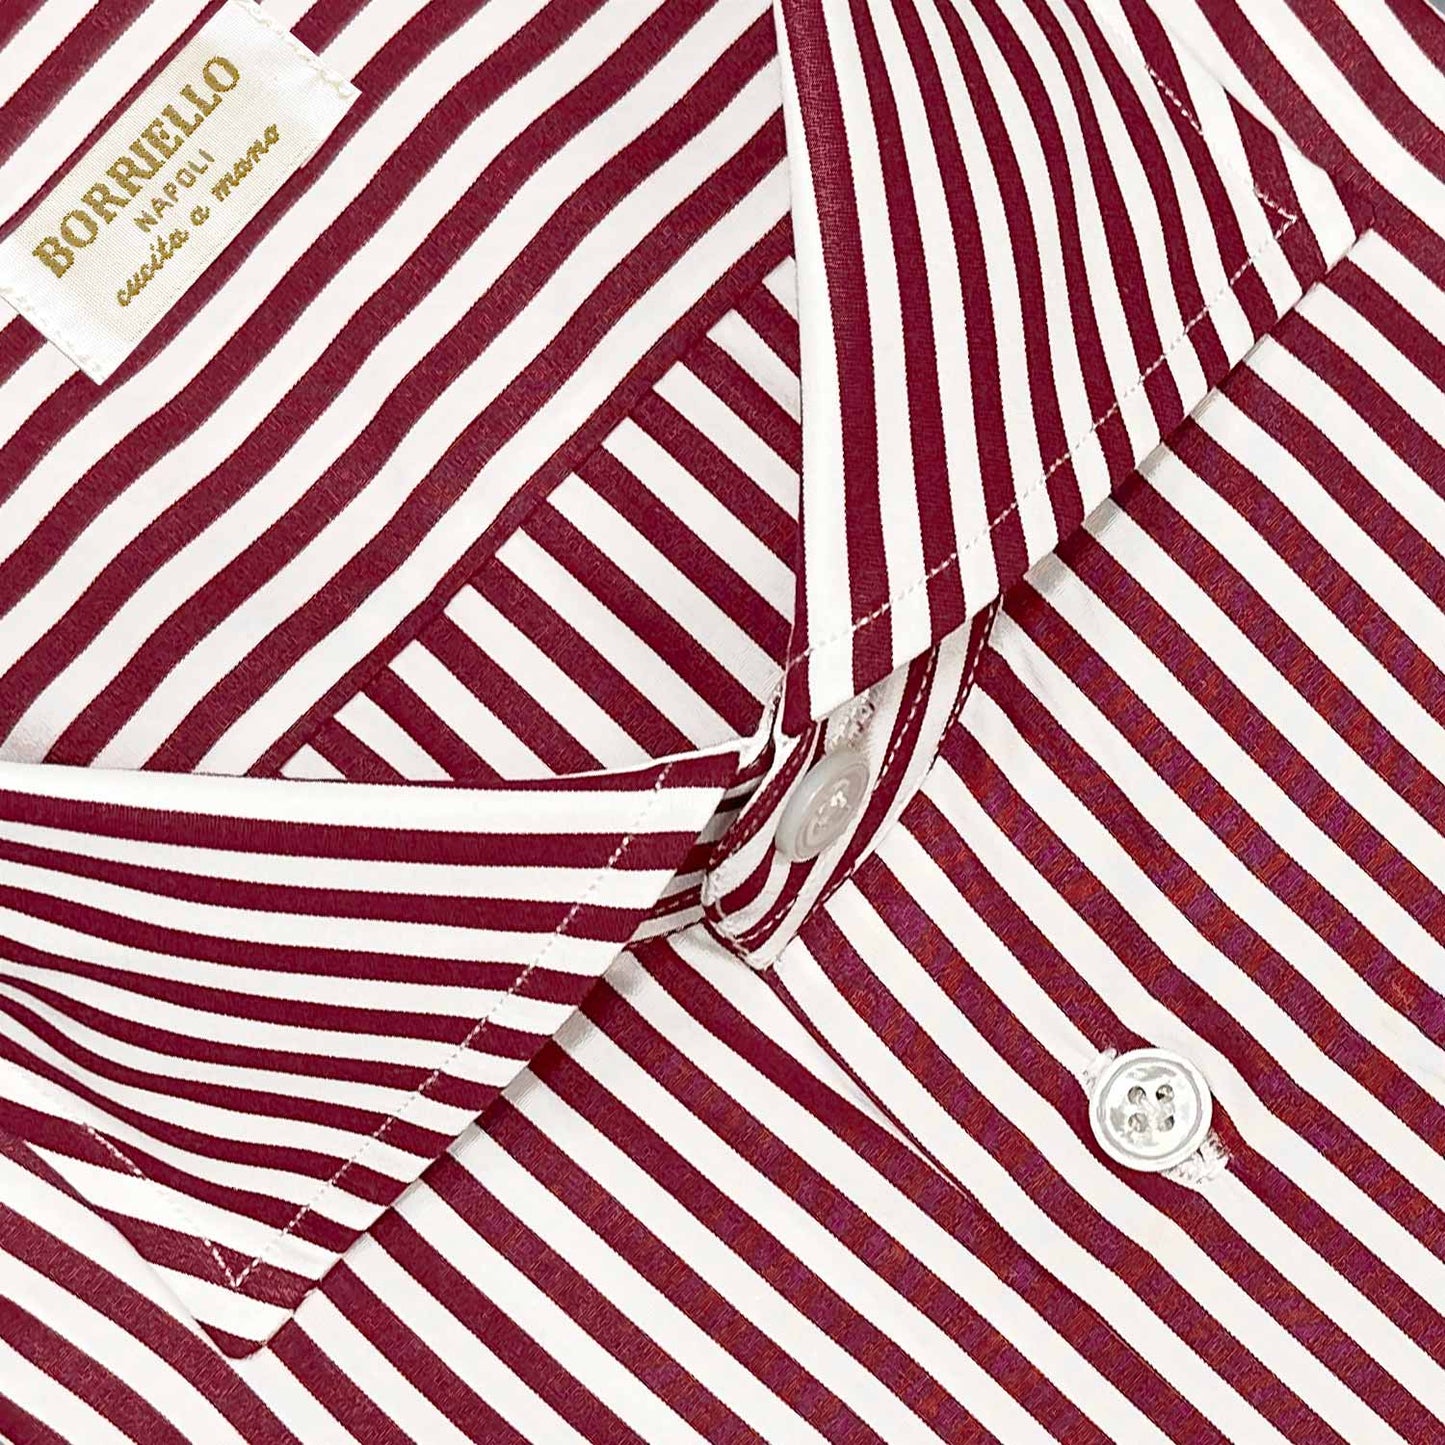 Load image into Gallery viewer, Borriello Burgundy Red Striped Shirt Popeline Cotton-Wools Boutique Uomo
